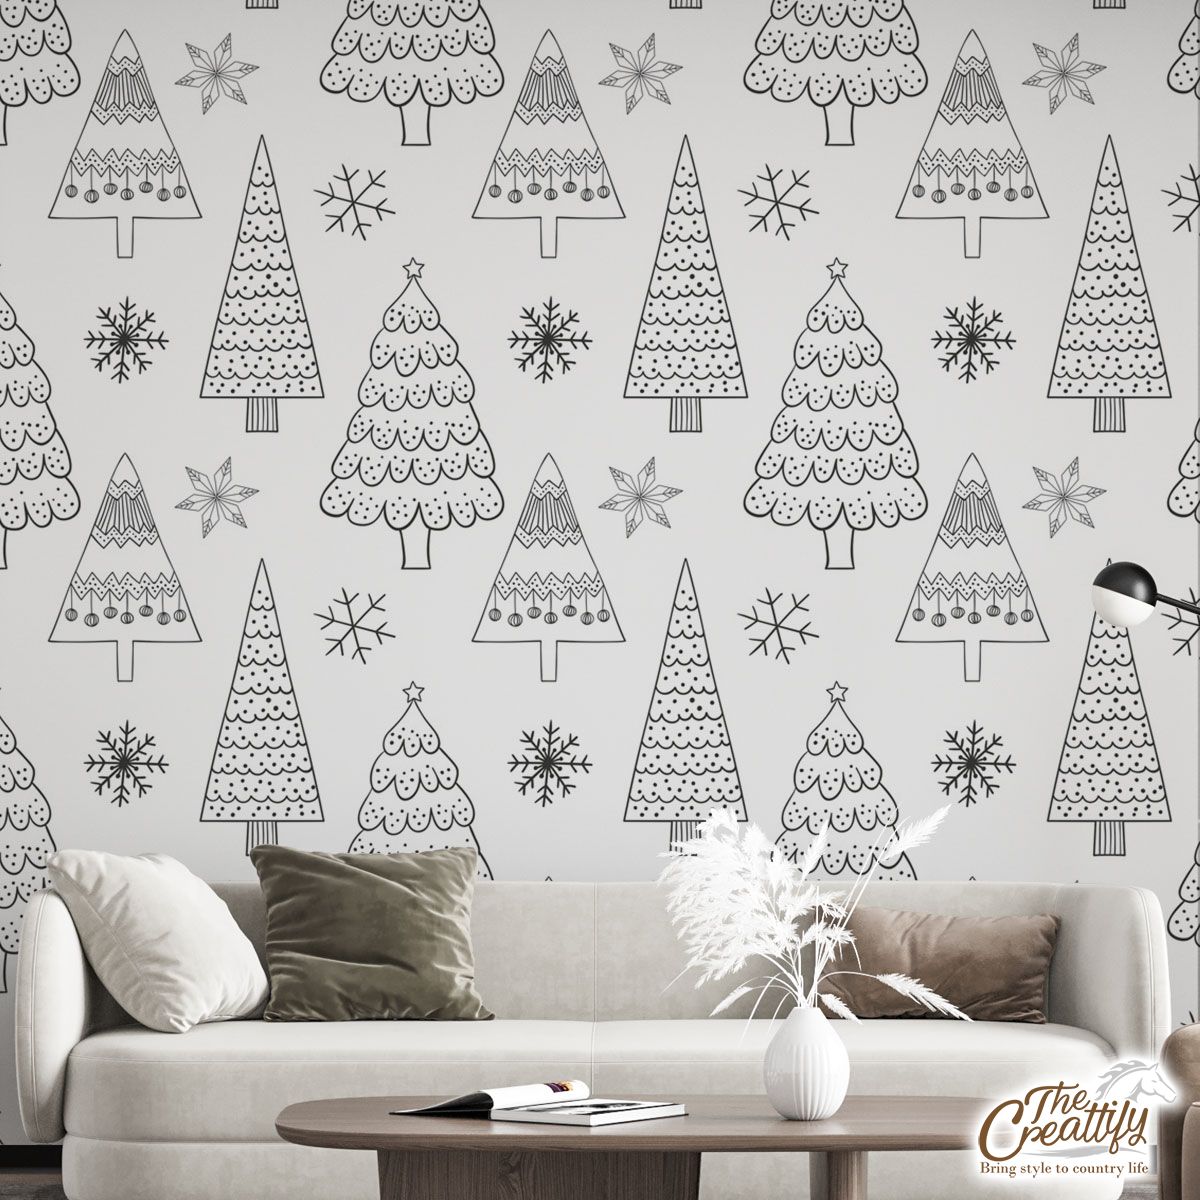 Black And White Christmas Tree With Snowflake Wall Mural